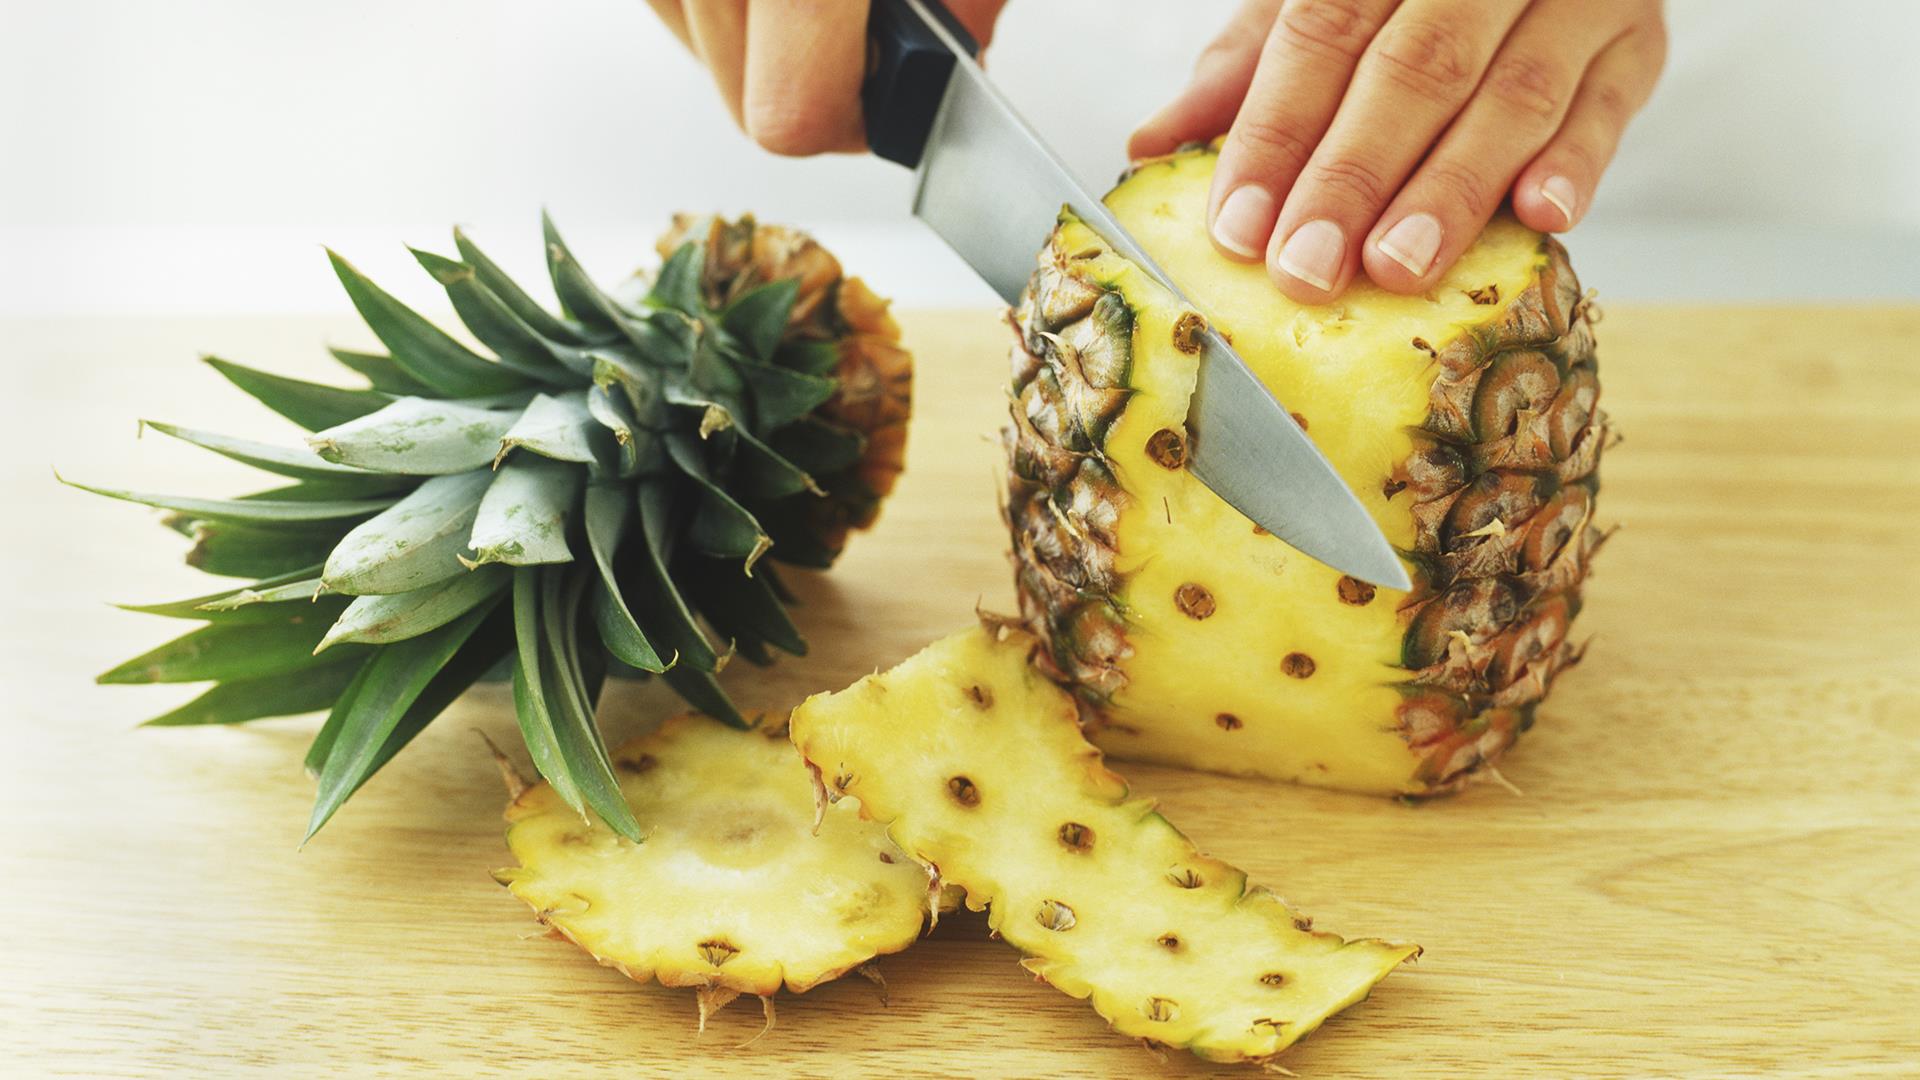 How to Cut a Pineapple (Without Butchering It)